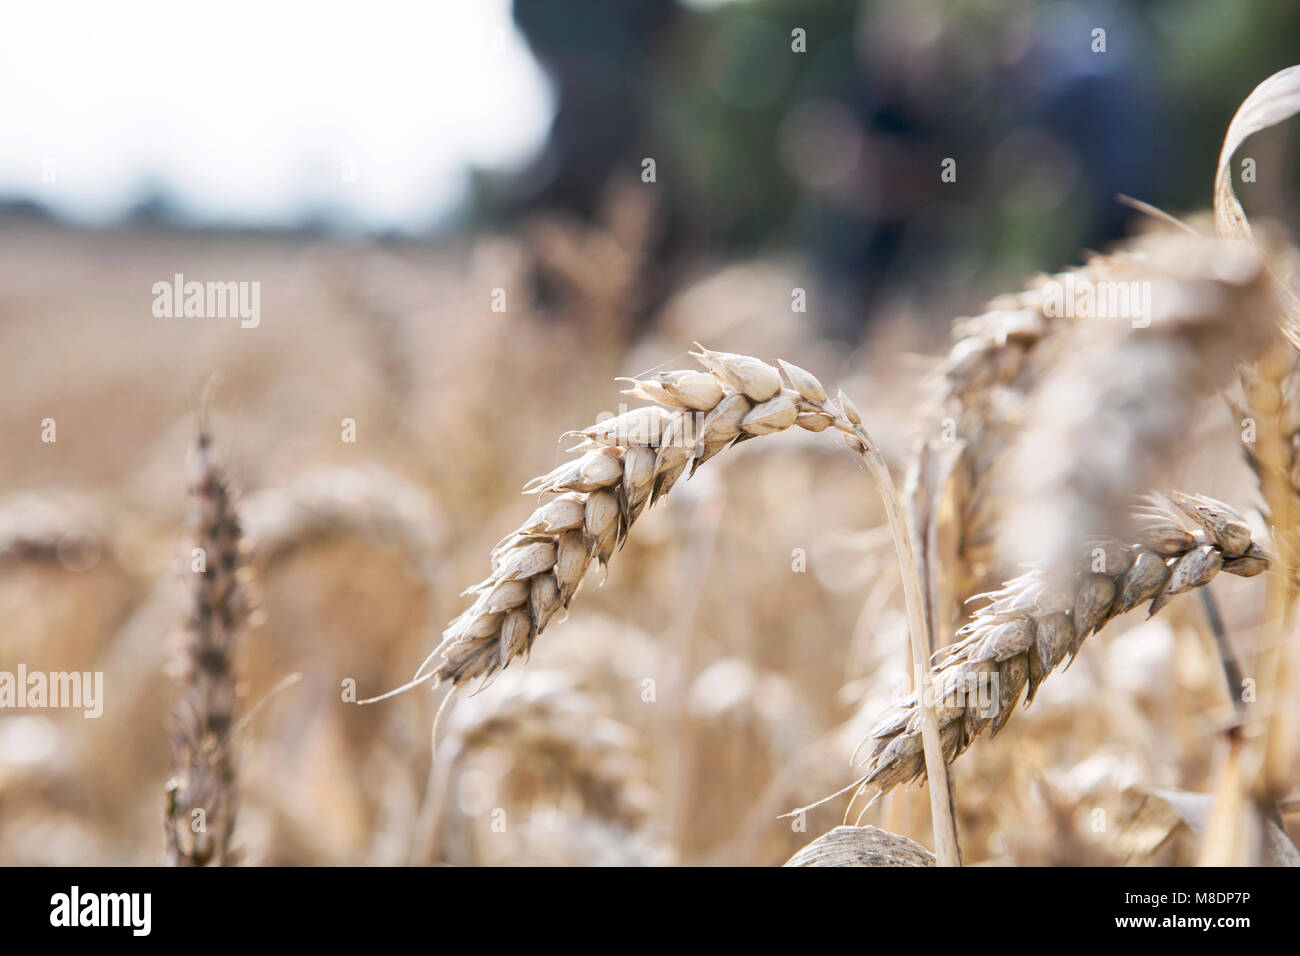 Wheat growing in field, close-up Stock Photo